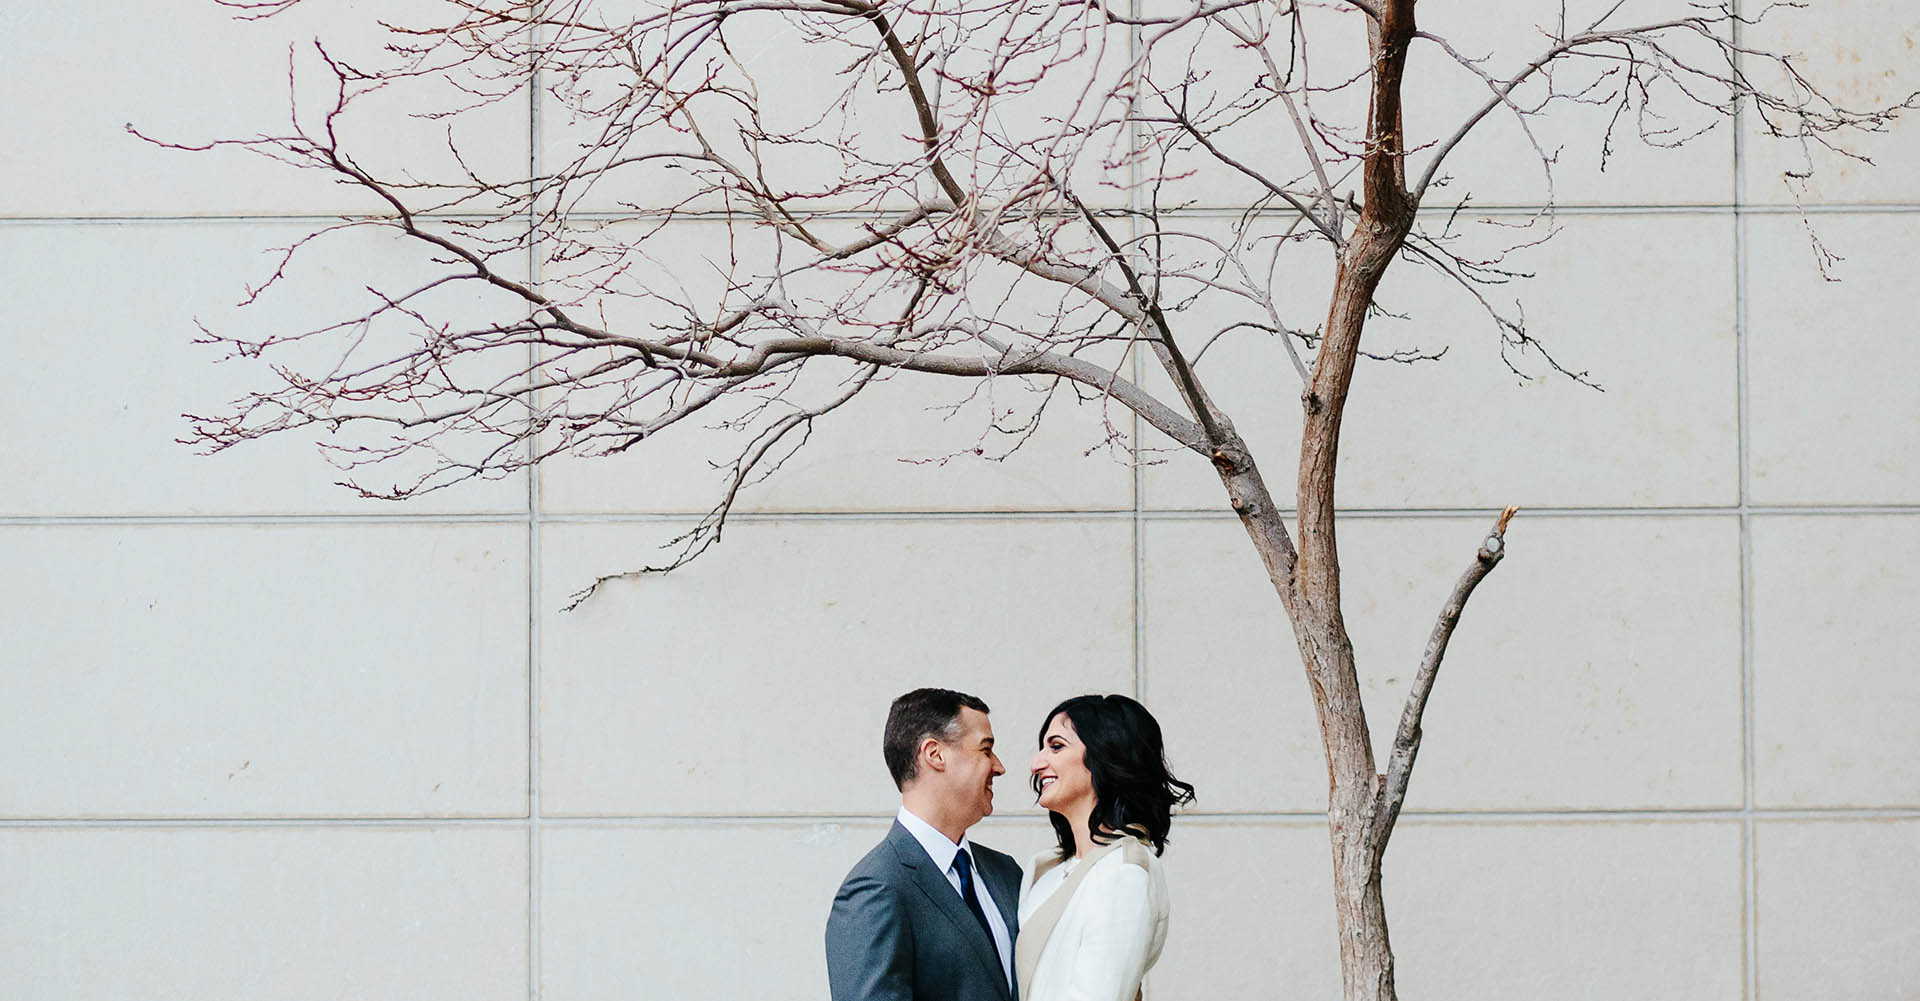 Wedding pictures at the Seattle Courthouse